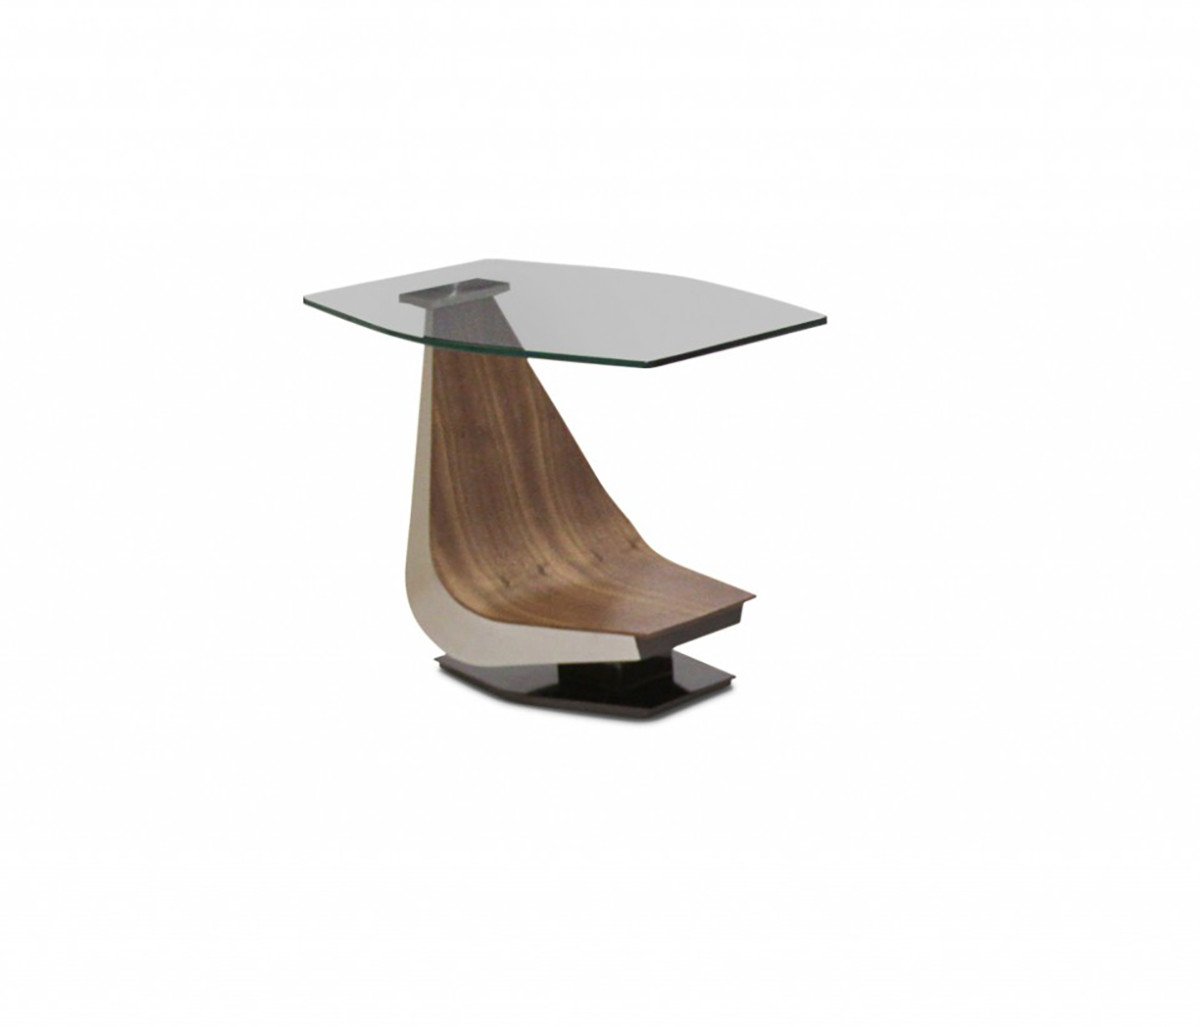 the contemporary designed victor occasional tables elite modern furniture austin five elements accent glass top patio coffee table pink lamp pottery barn bath nate berkus round